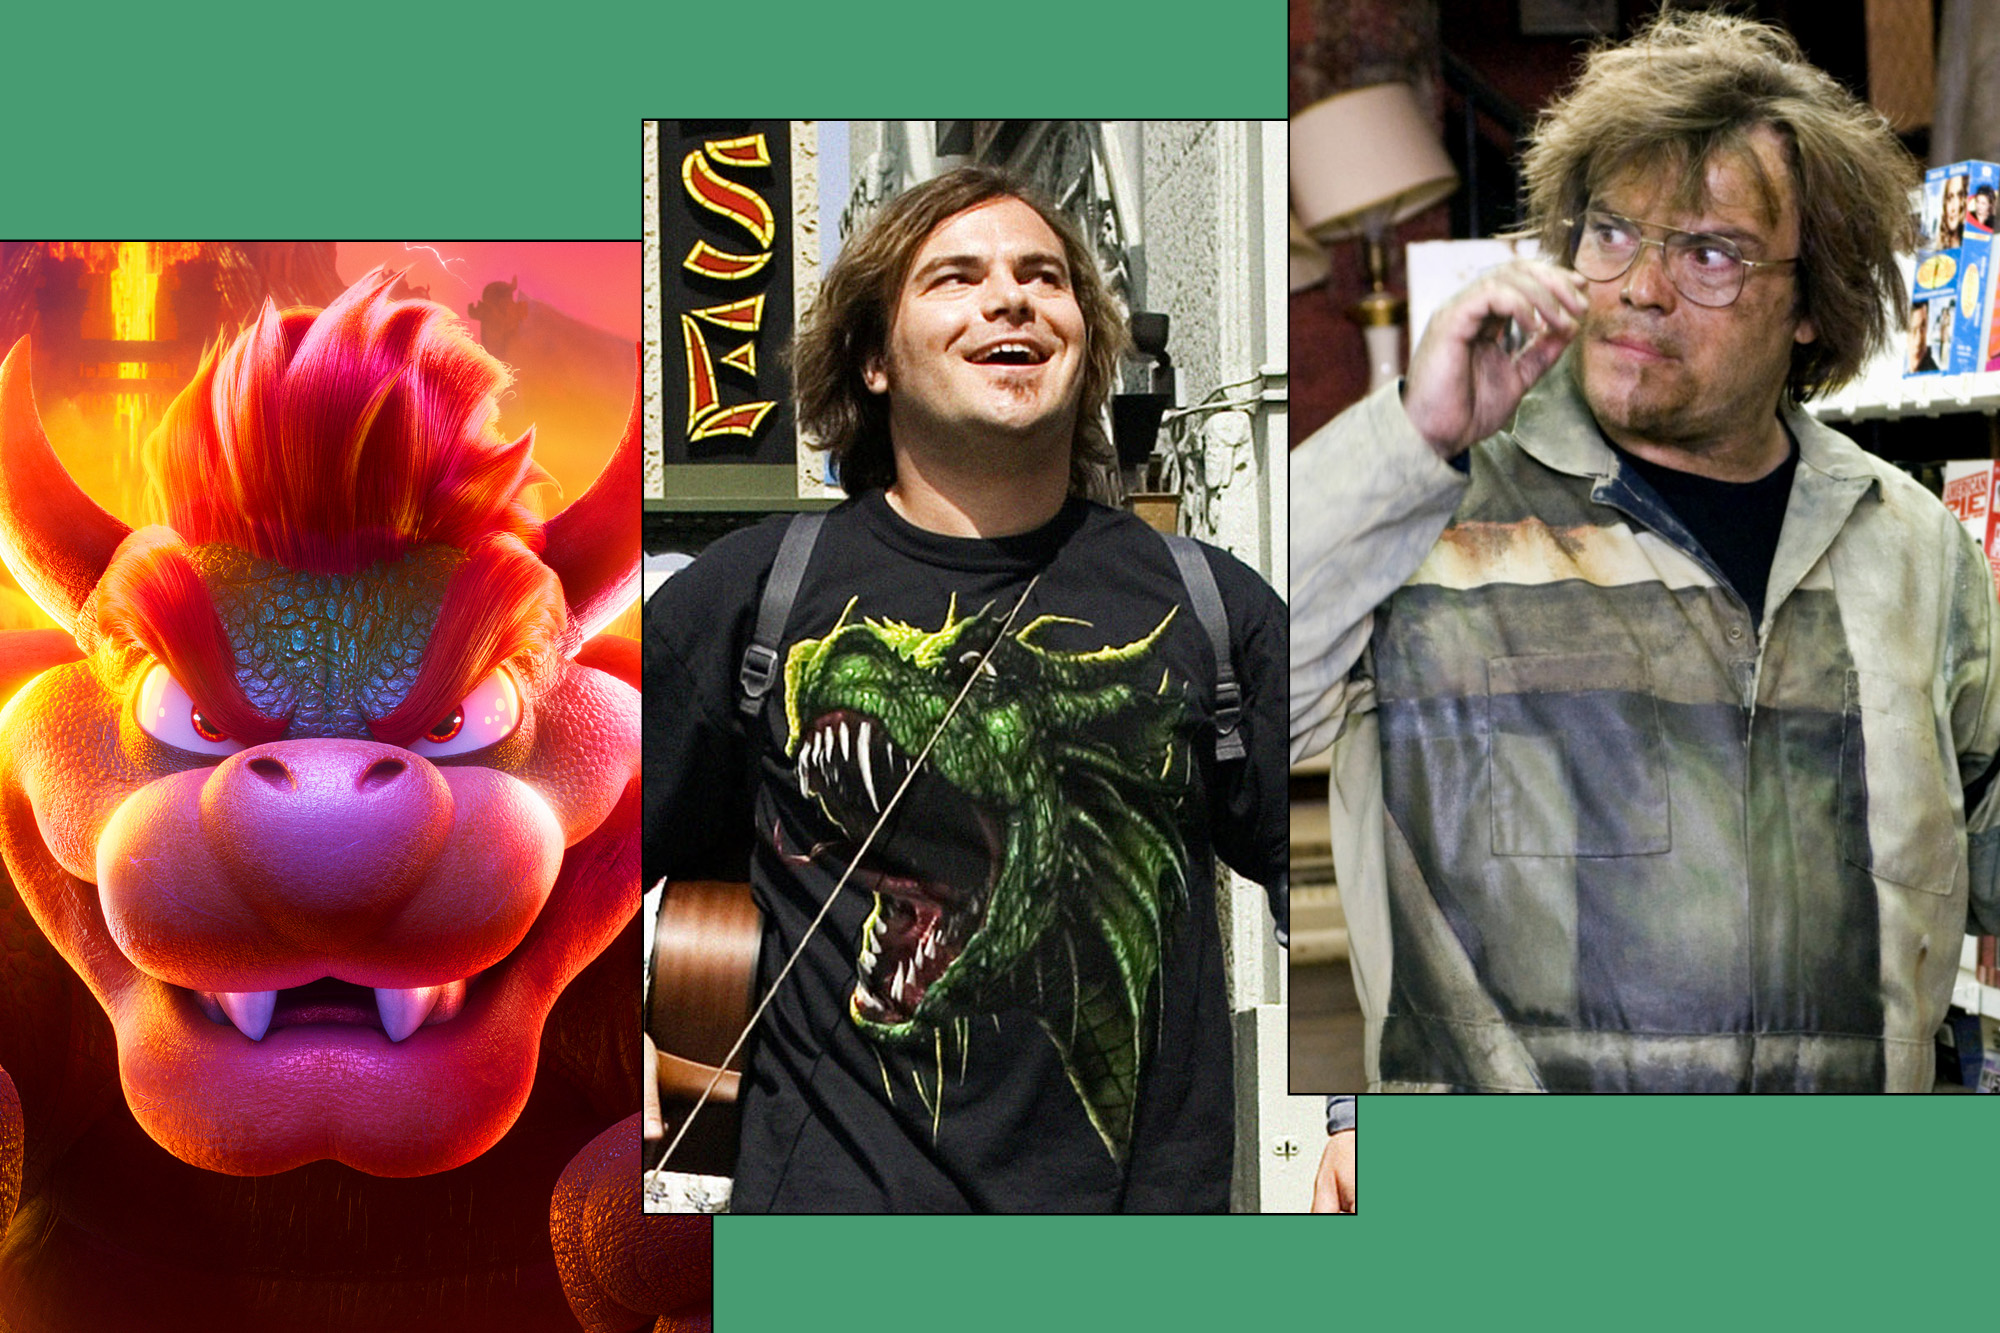 best jack black movies and tv shows Illumination’s The Super Mario Bros. Movie; TENACIOUS D IN THE PICK OF DESTINY, Jack Black, 2006, (c) New Line/courtesy Everett Collection; BE KIND REWIND, Jack Black (recreating the character Doc from Back To The Future), 2008. ©New Line Cinema/courtesy Everett Collection